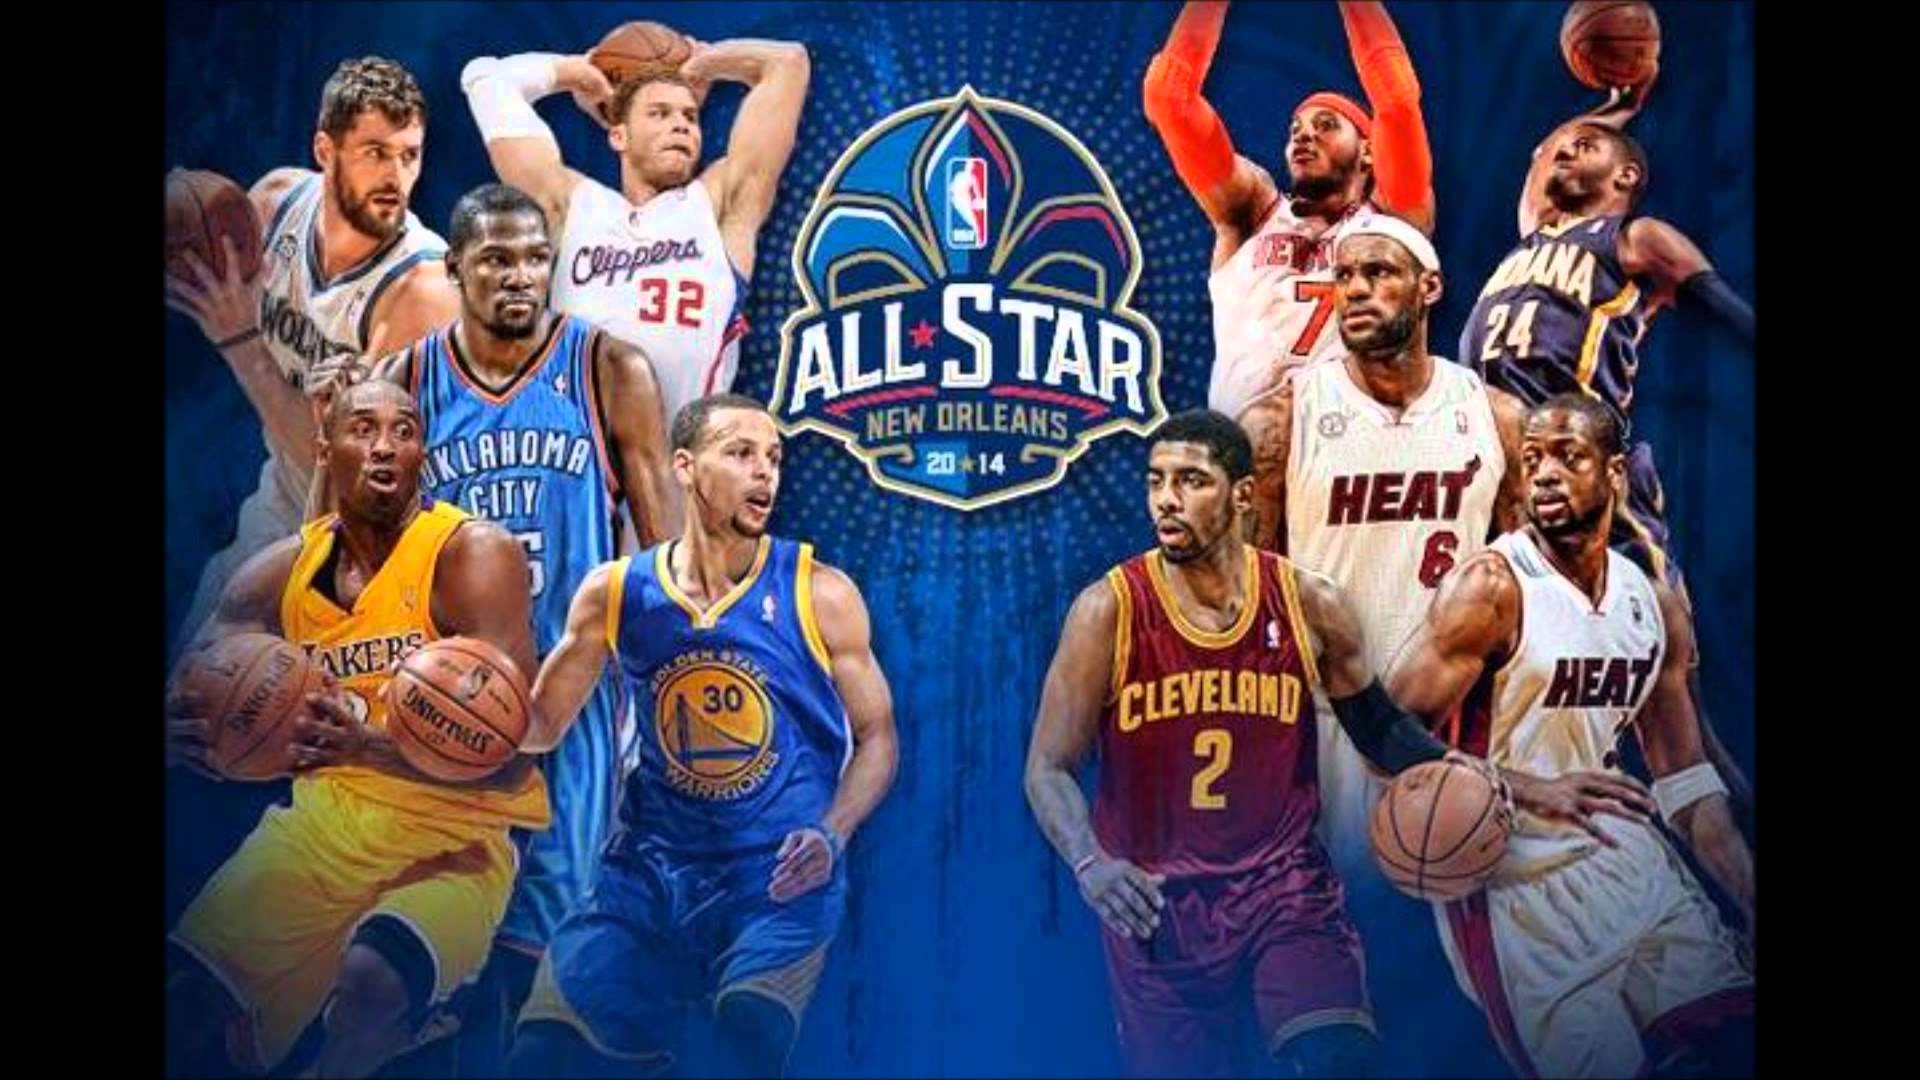 Free download NBA 2014 All Star Game Starters East West 1920x1080